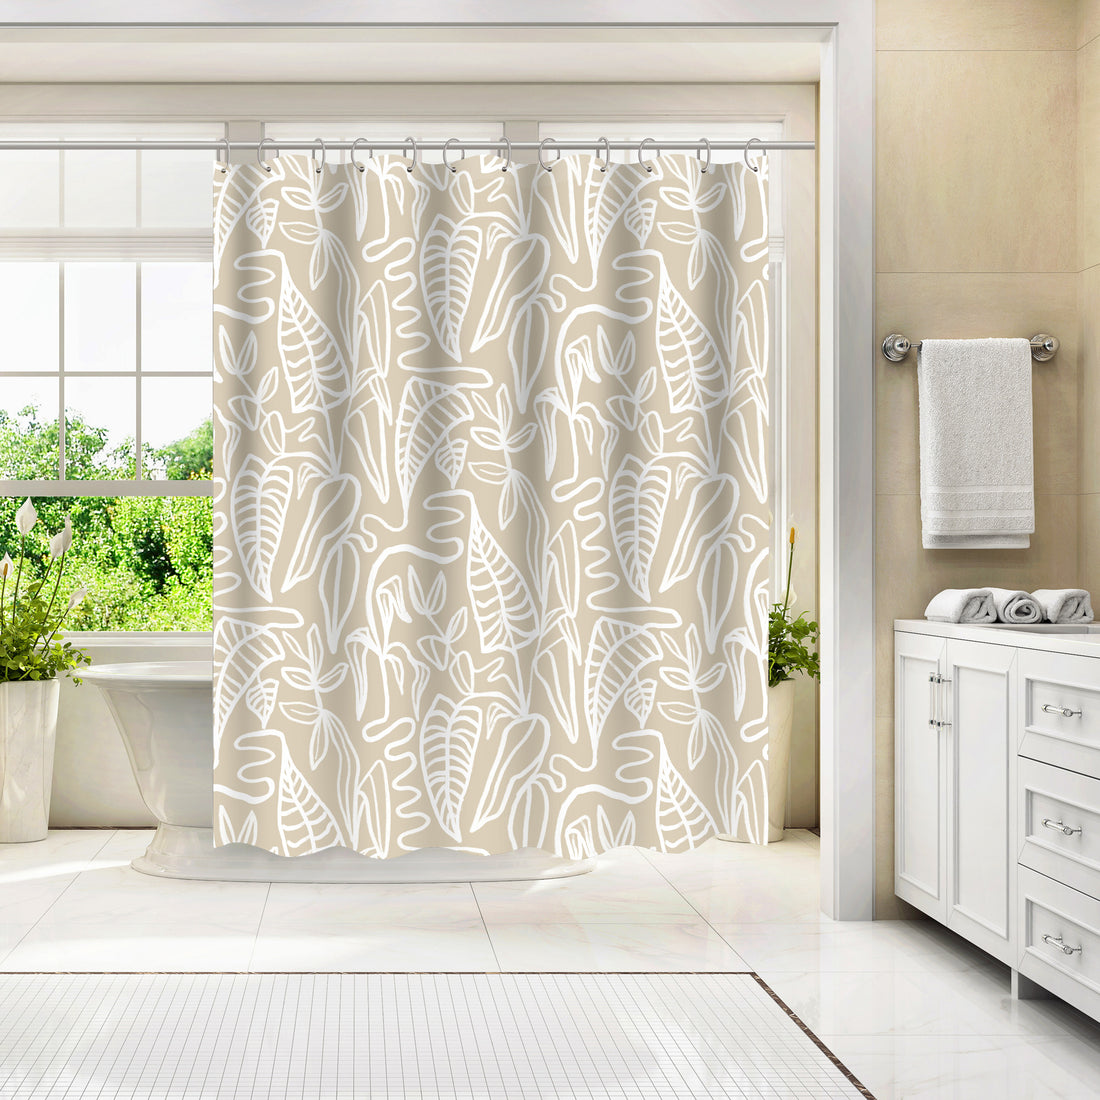 Artistic Shower Curtains